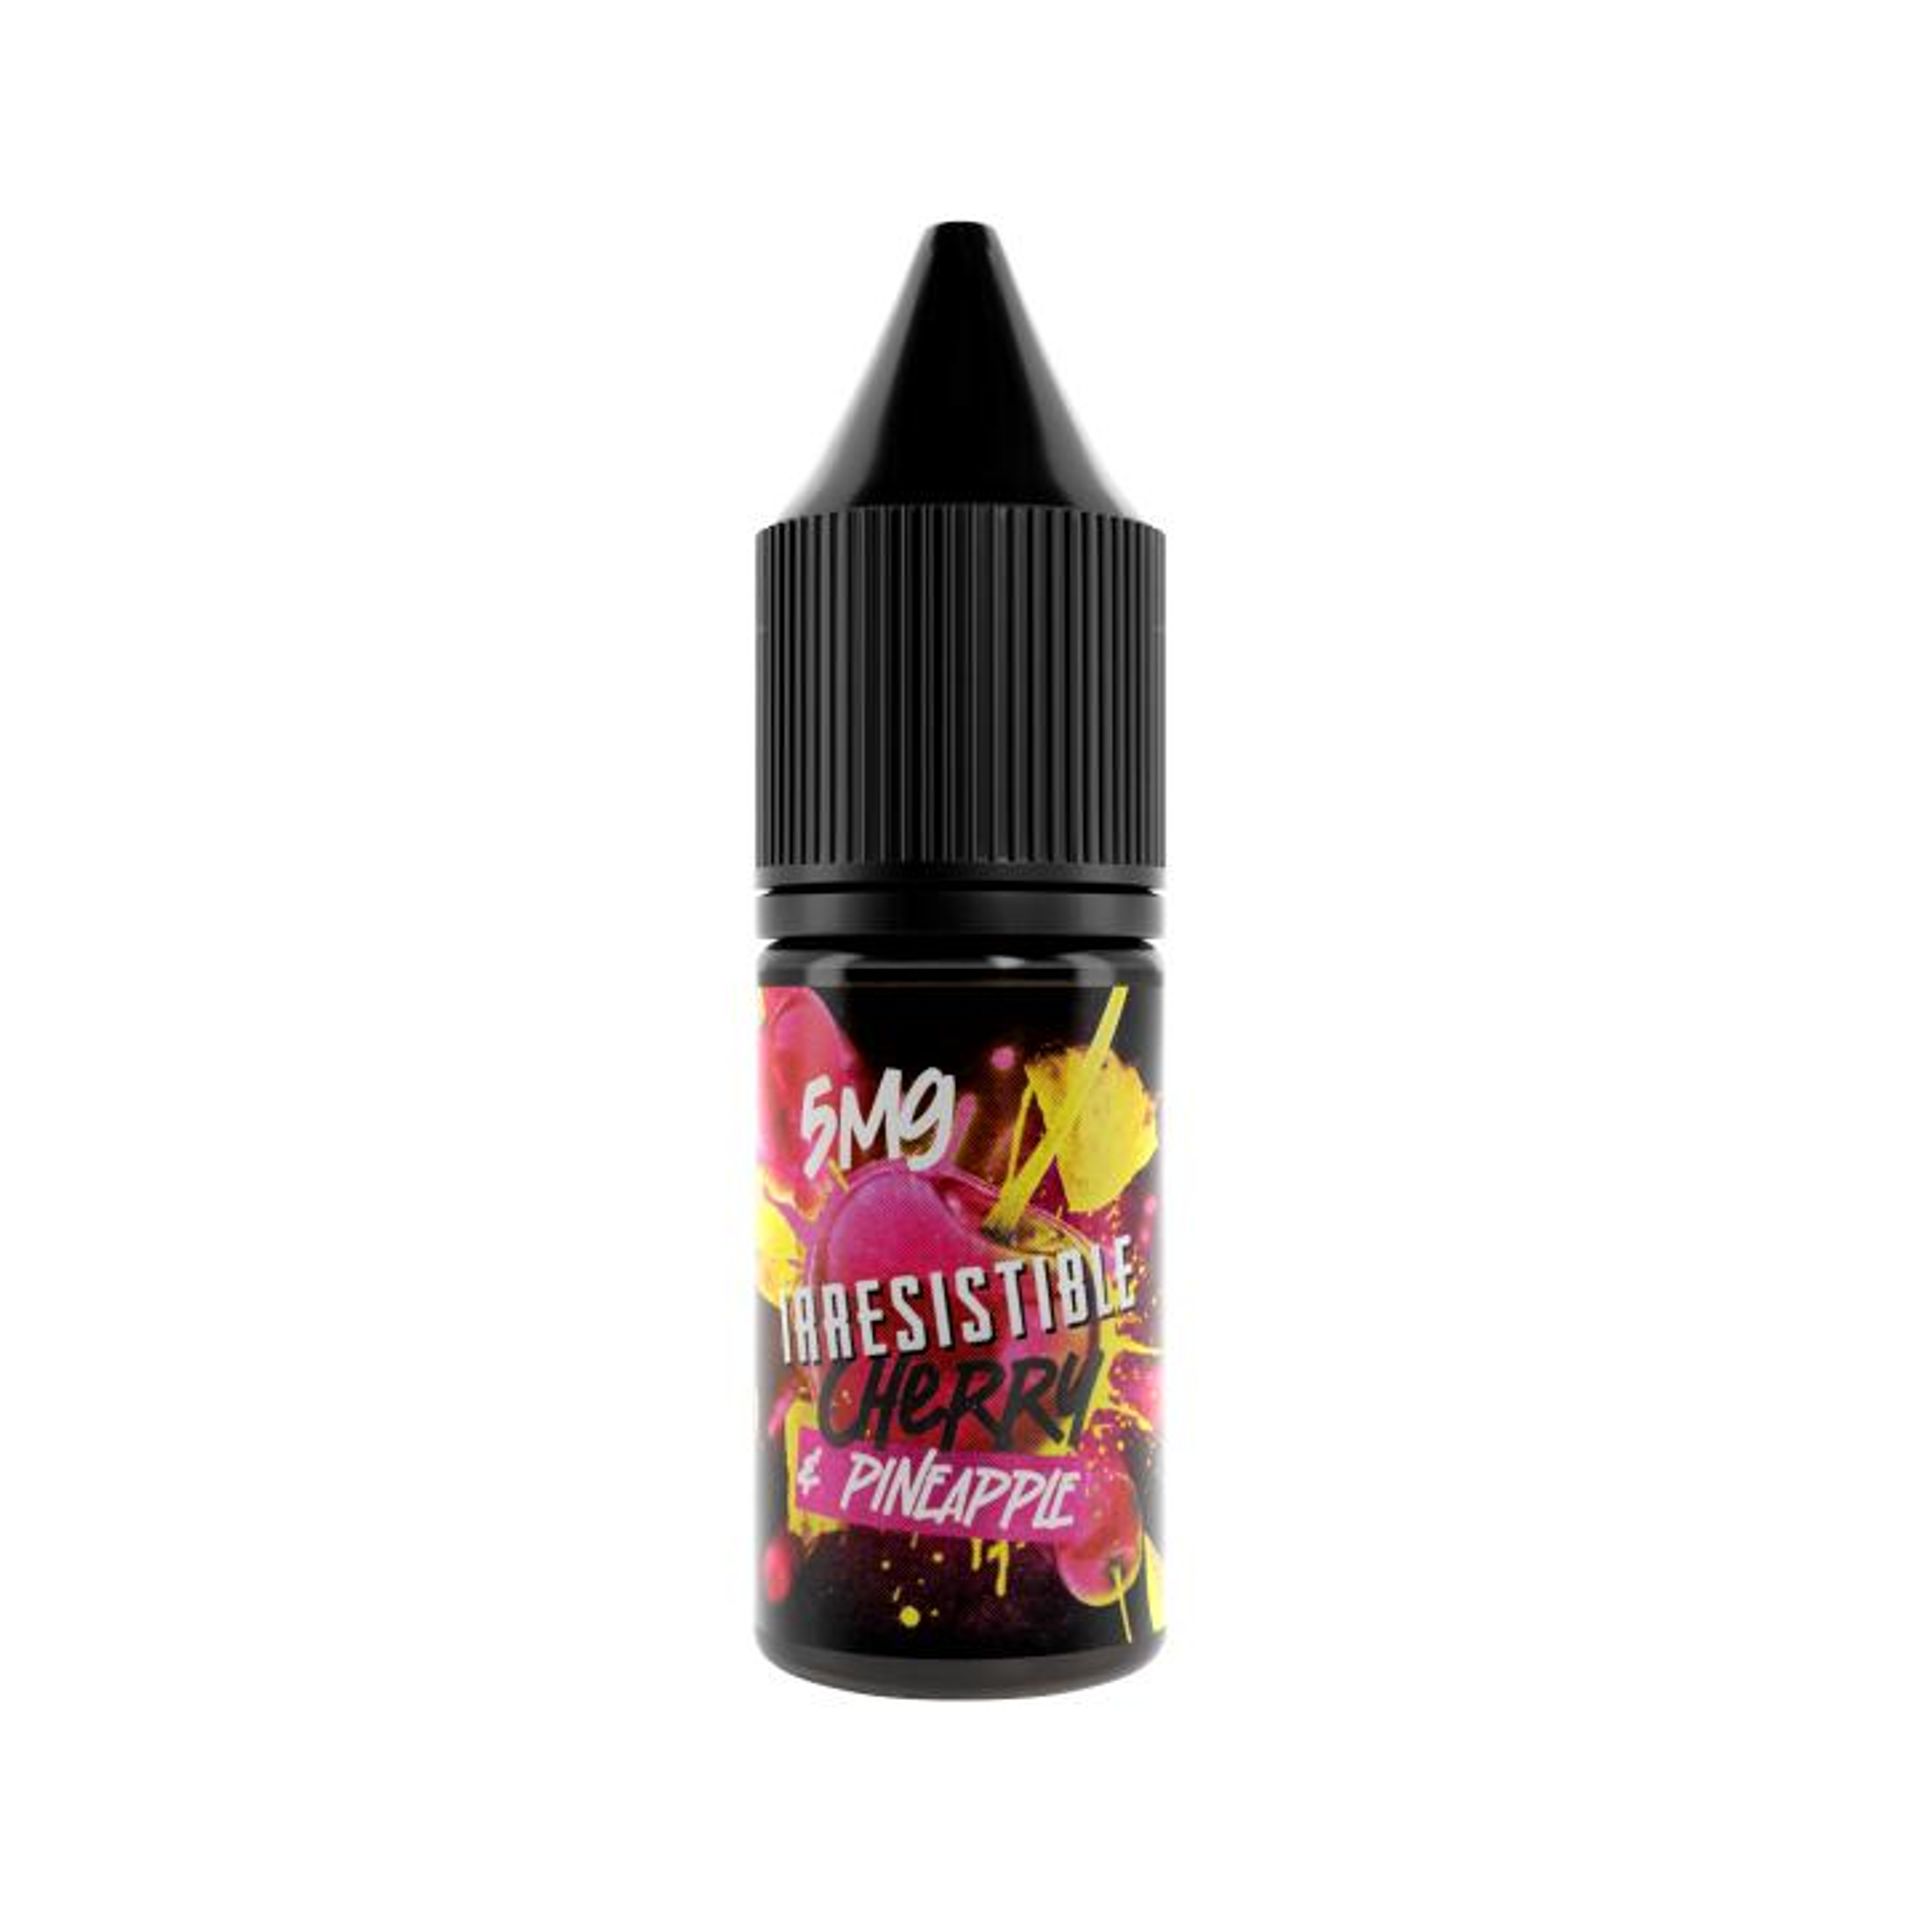 Image of Cherry Pineapple by Irresistible E-liquids